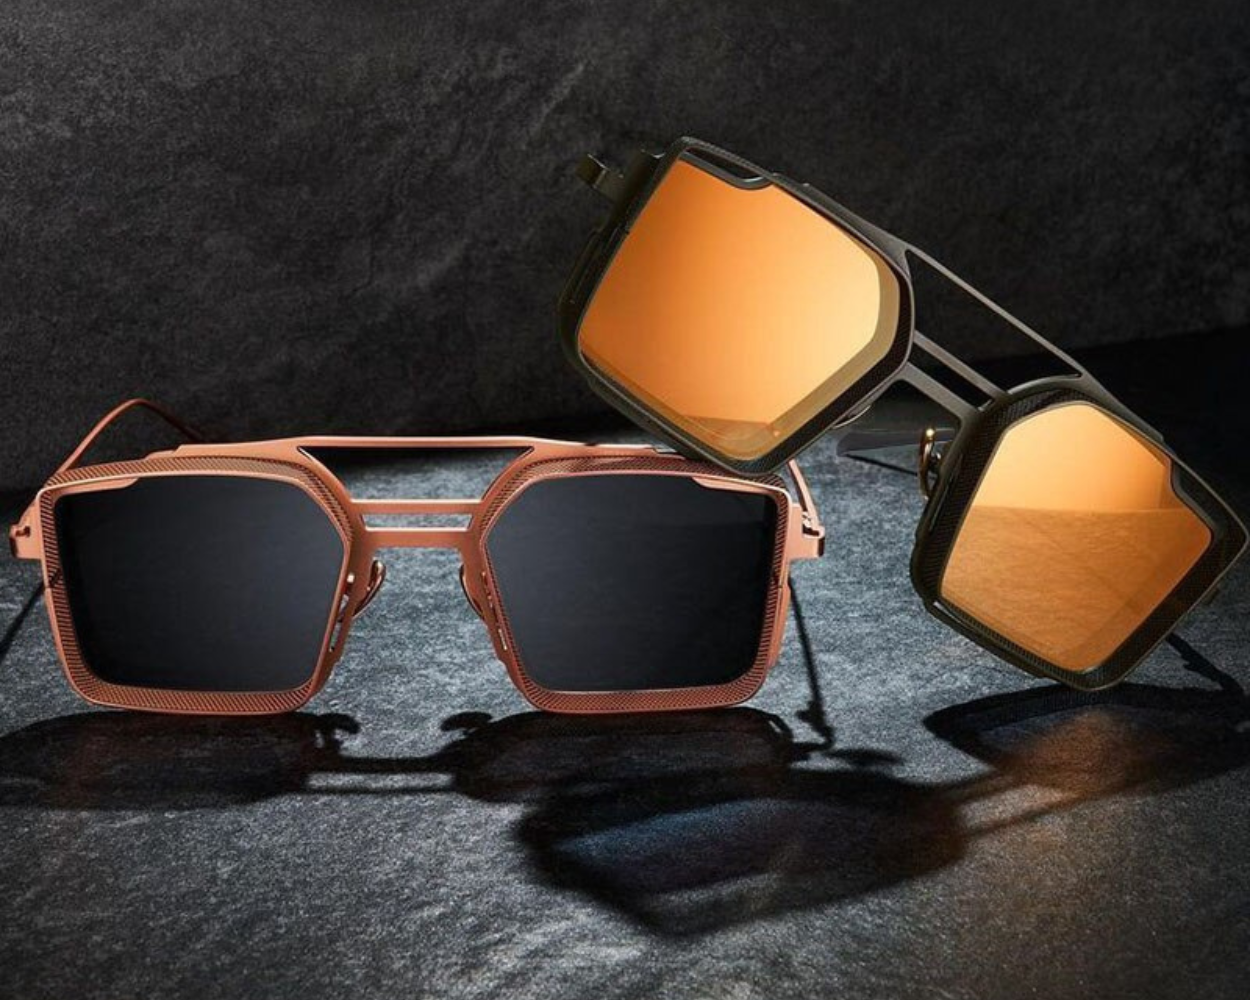 Tectonic Sunglasses - Who Cares Why Not